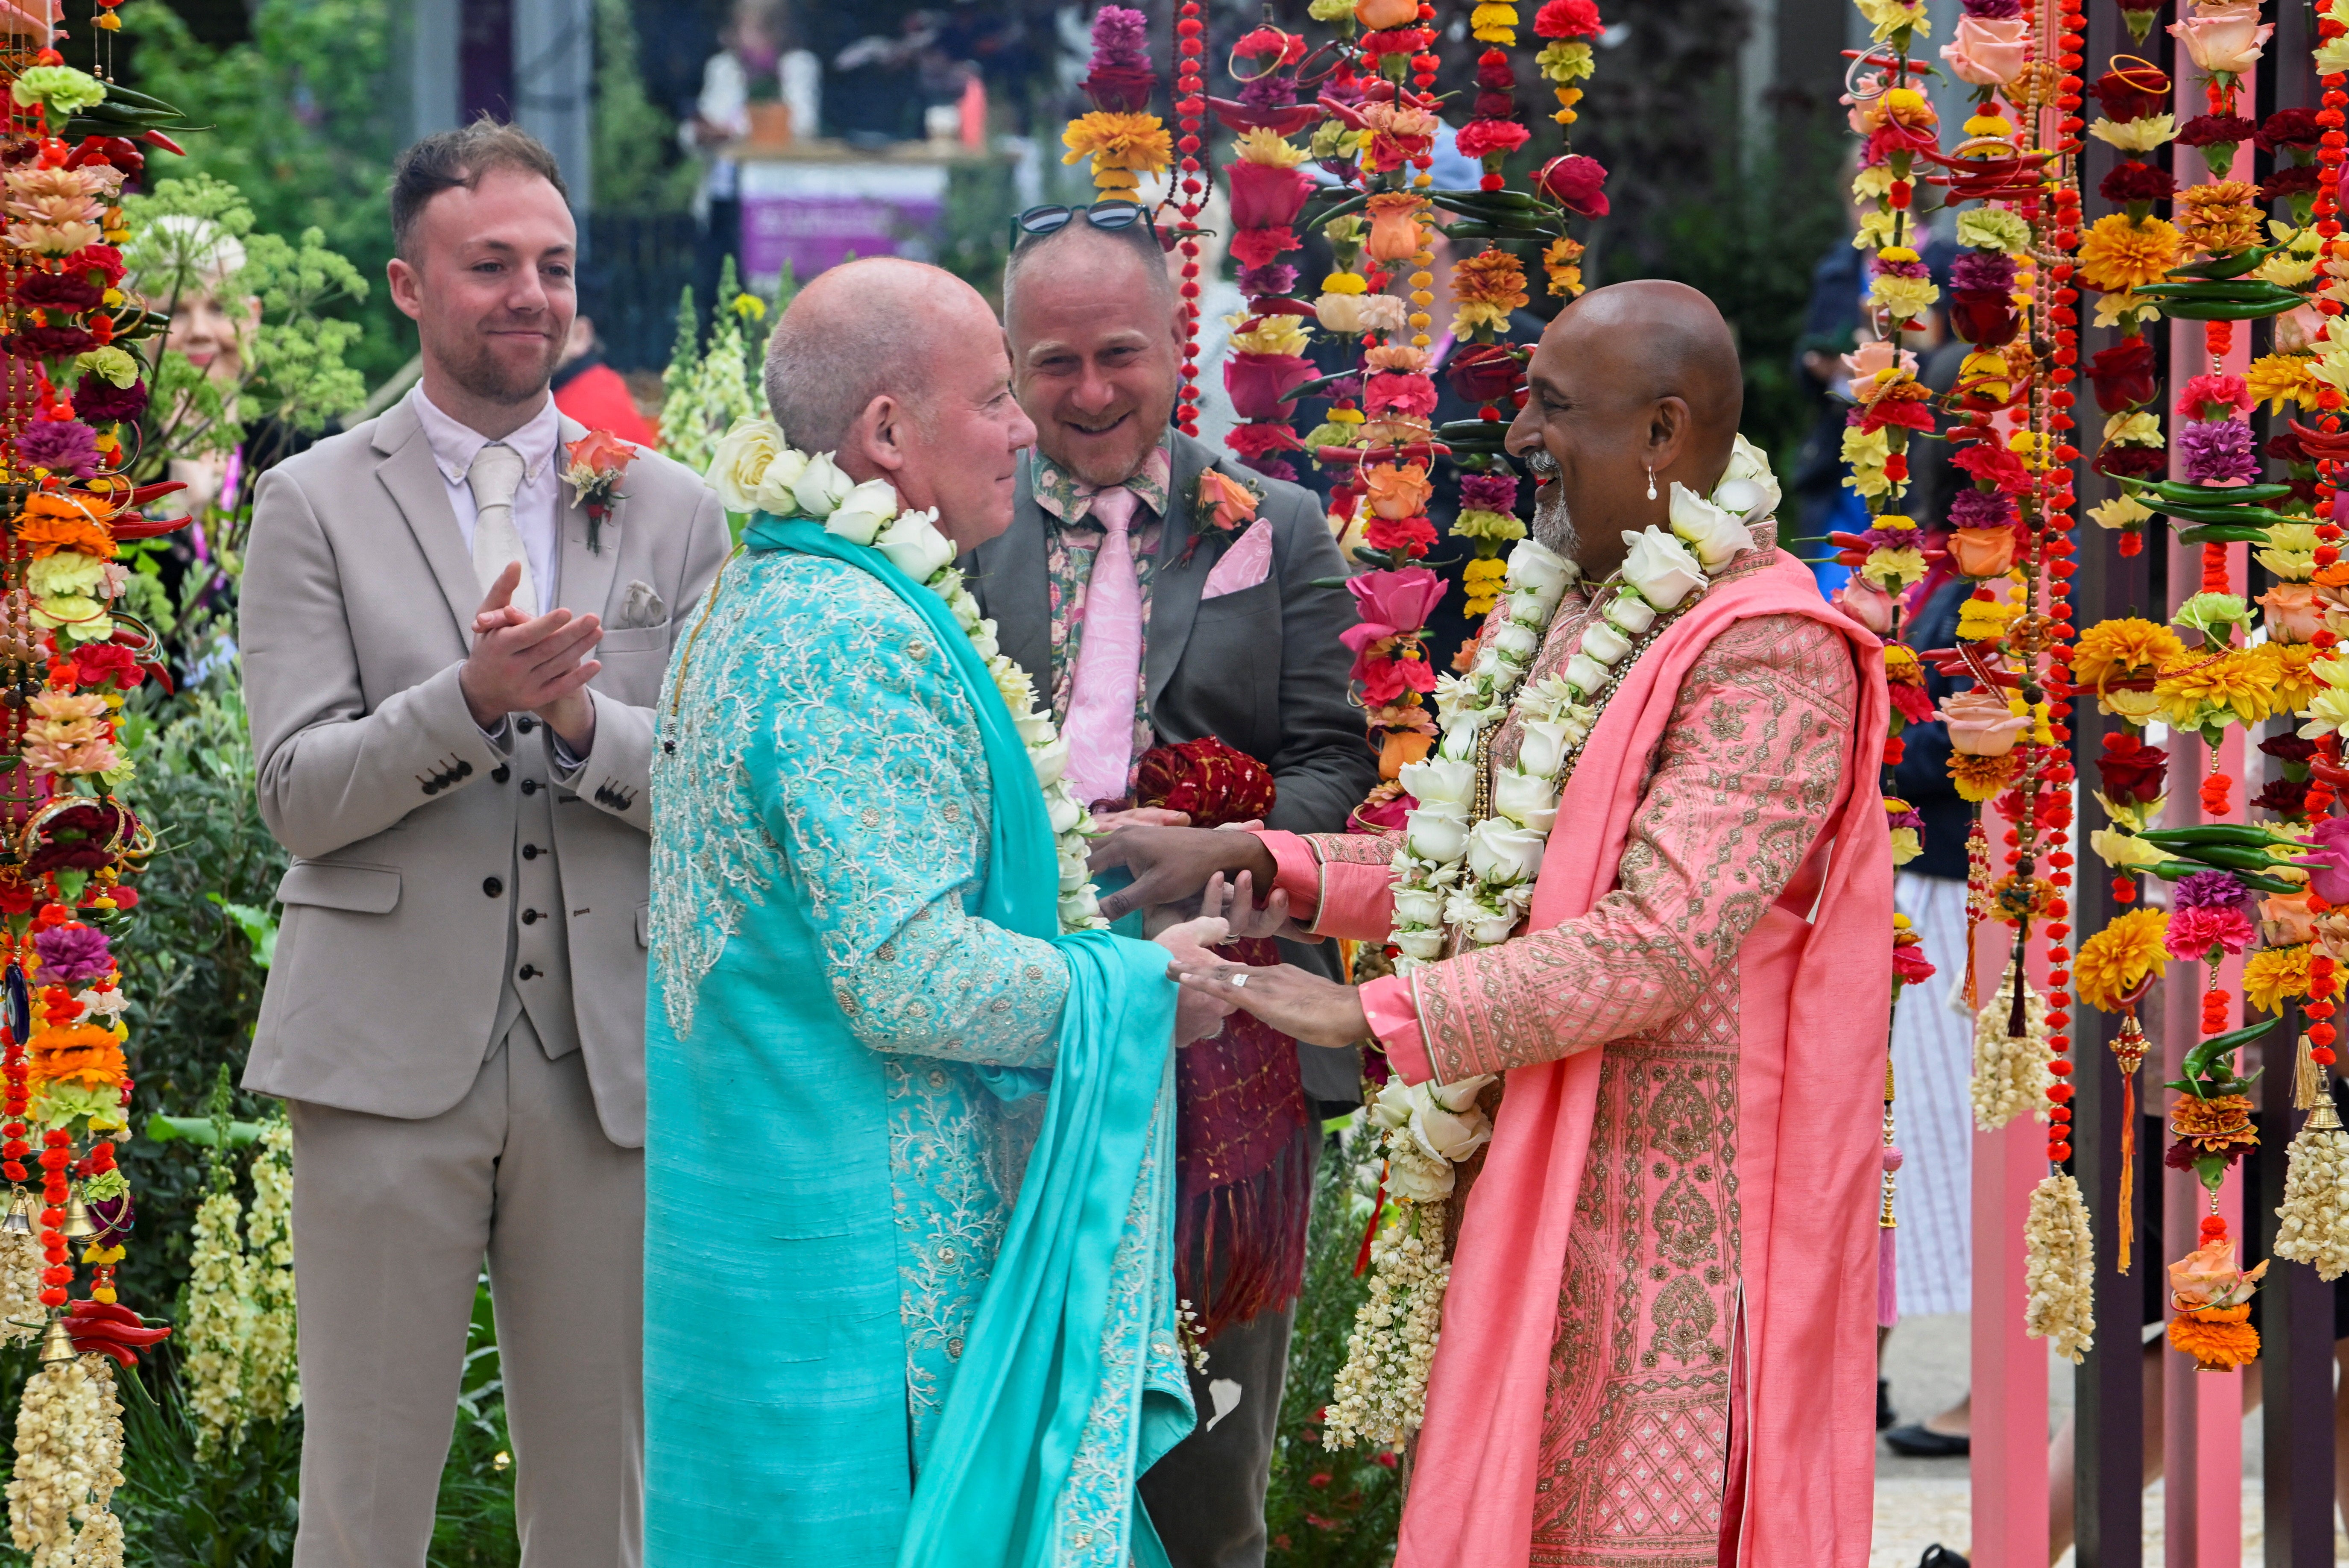 <p>Manoj Malde and Clive Gillmor marry in a civil wedding ceremony at the RHS and Eastern Eye Garden of Unity, the first wedding to take place at Chelsea Flower Show in London</p>